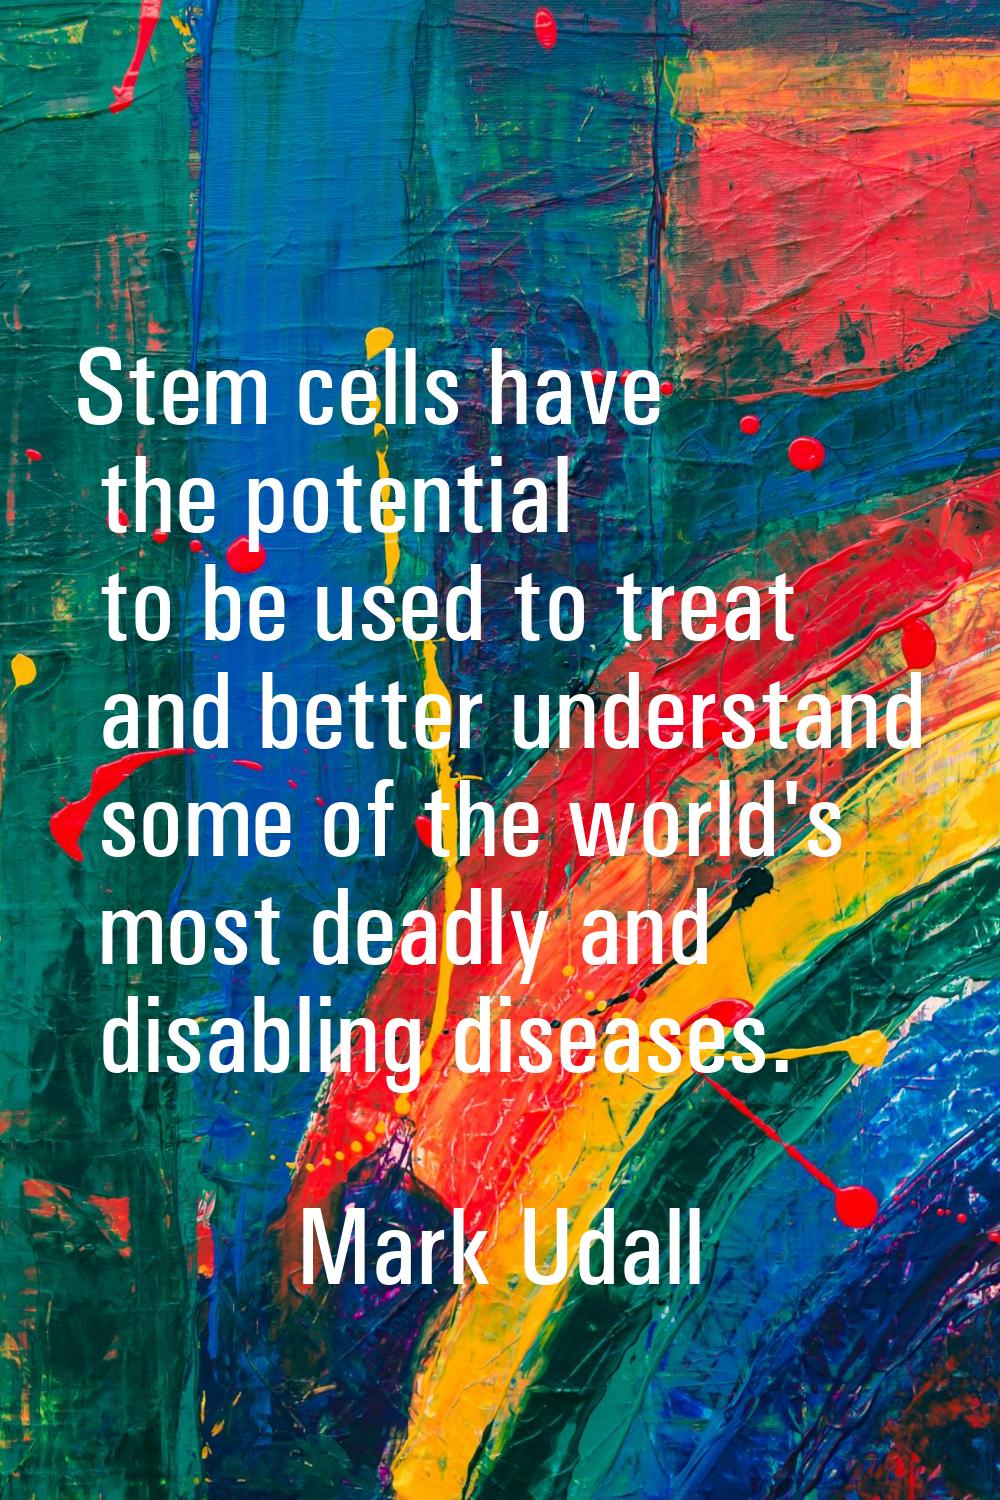 Stem cells have the potential to be used to treat and better understand some of the world's most de